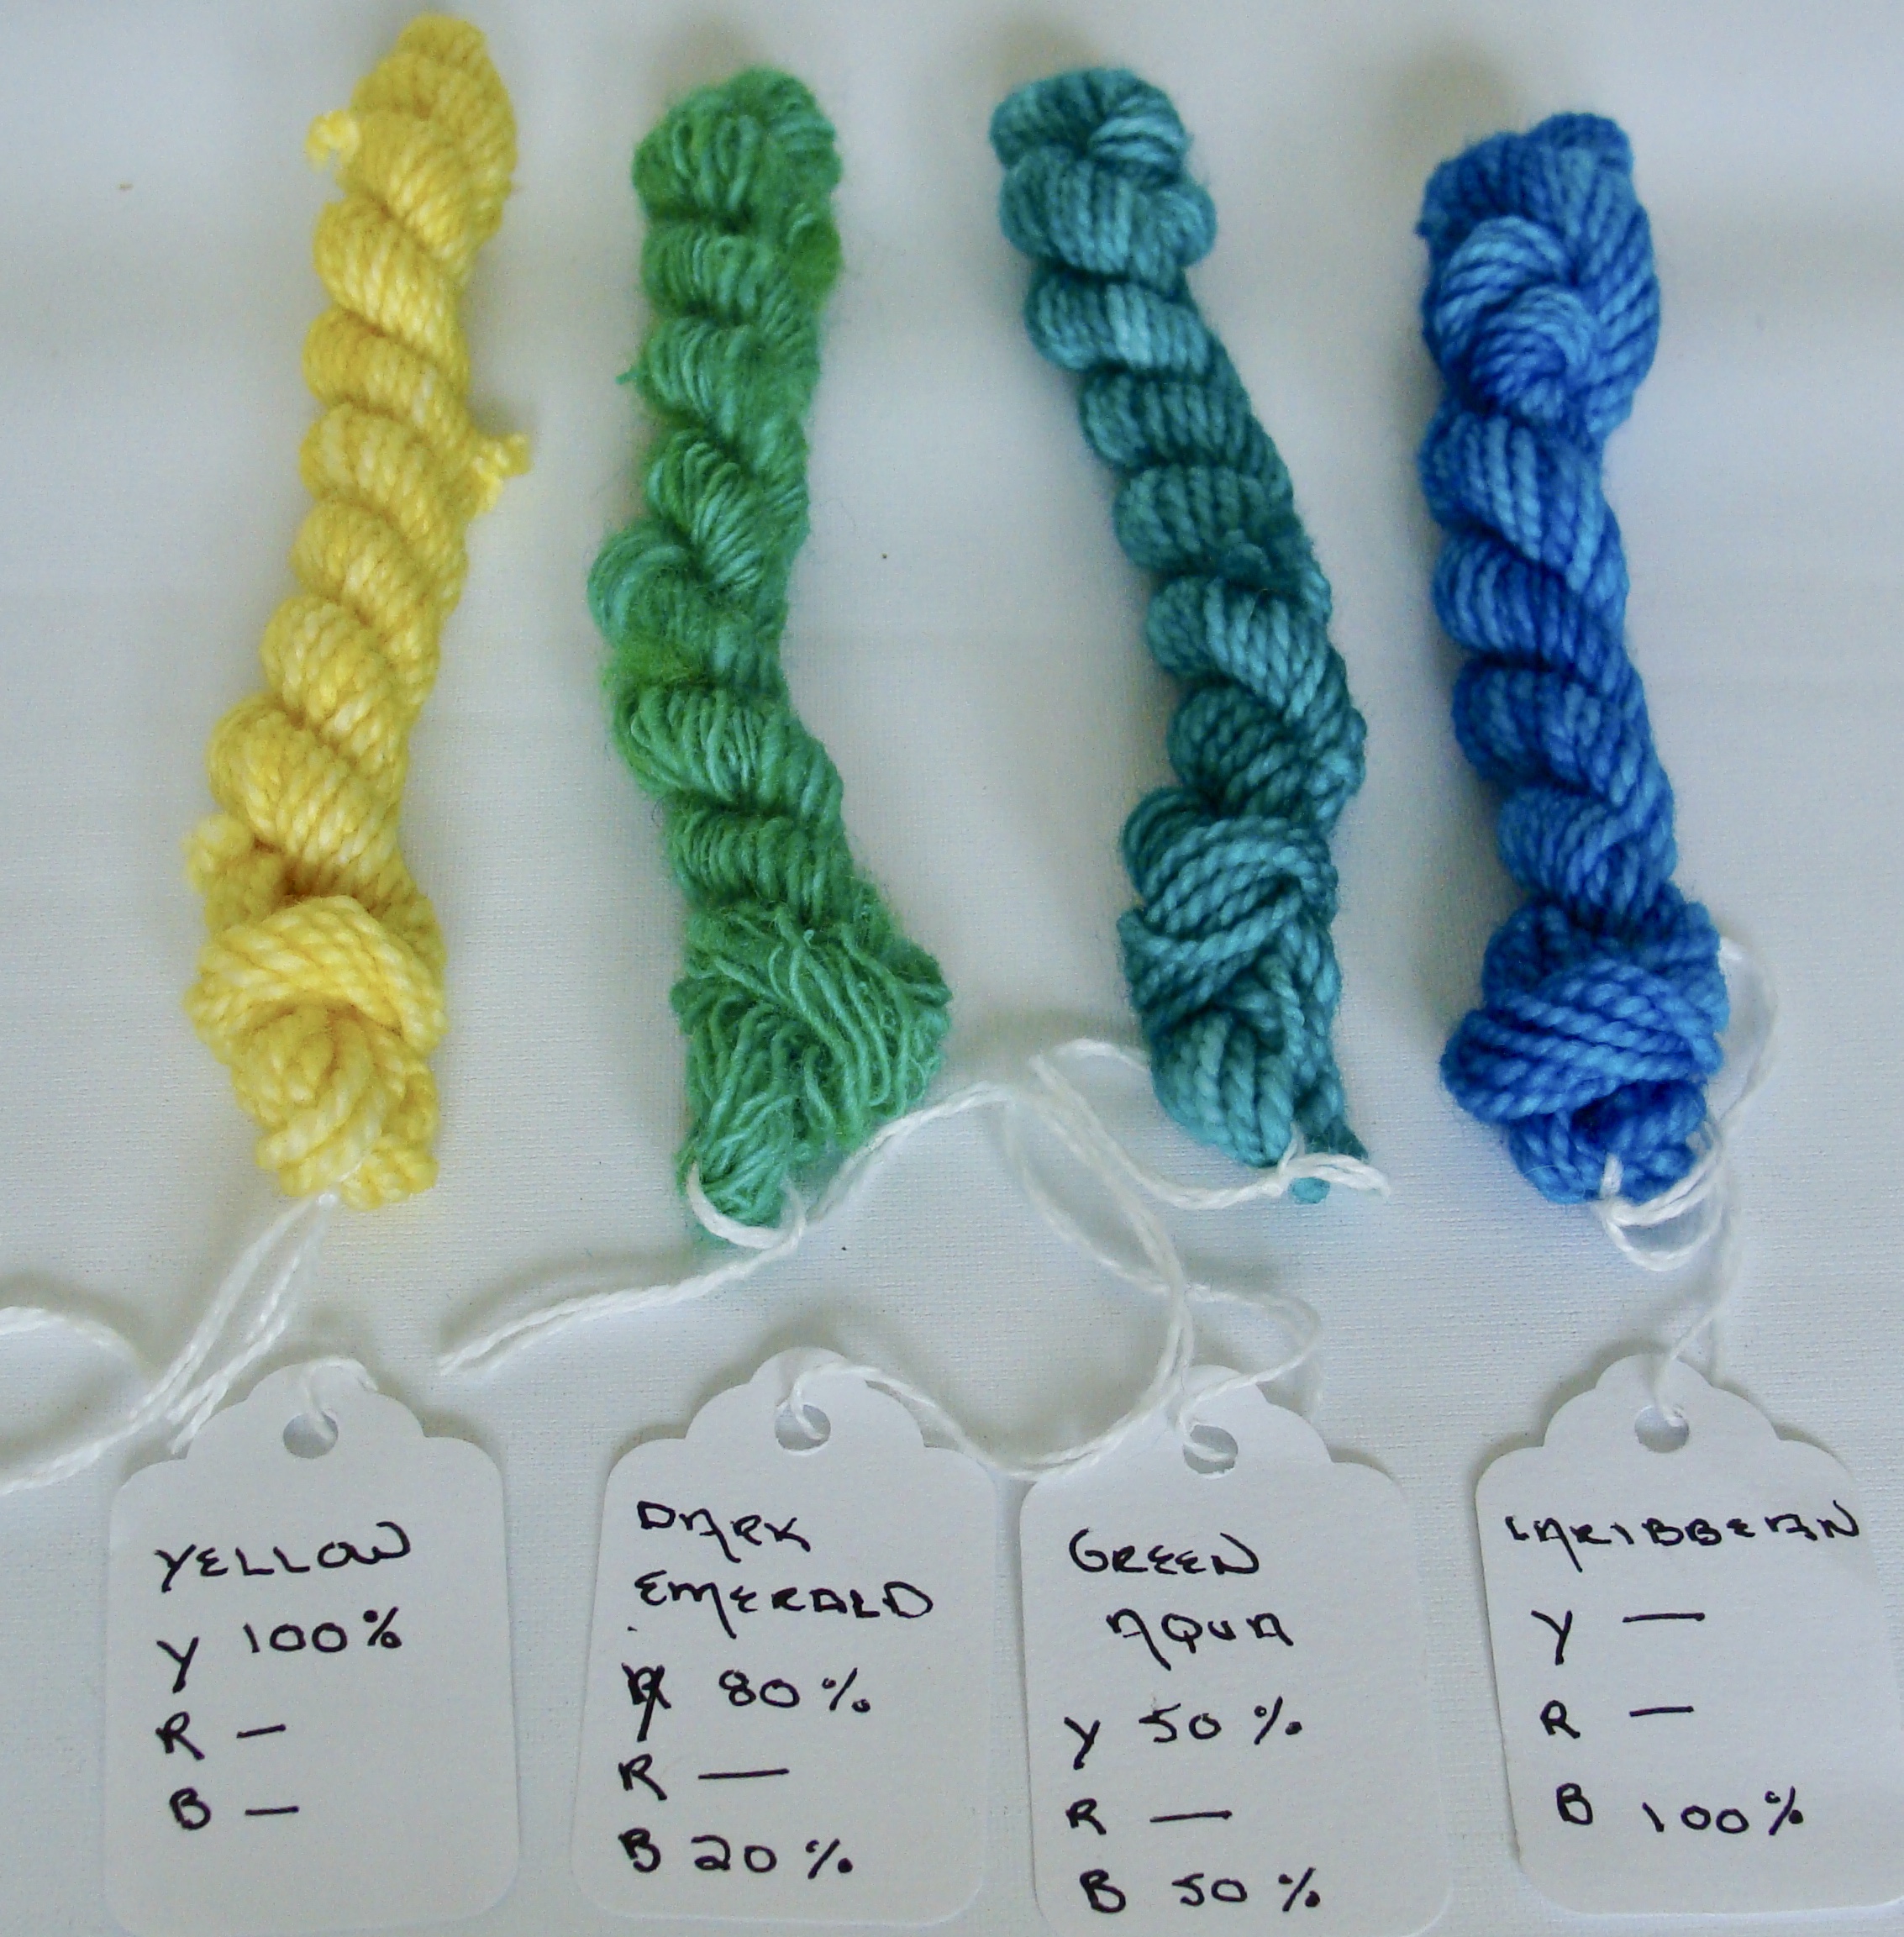 How To Tie Dye: Spiral With Six Blue Dharma Dyes (A Swatch Experiment) 